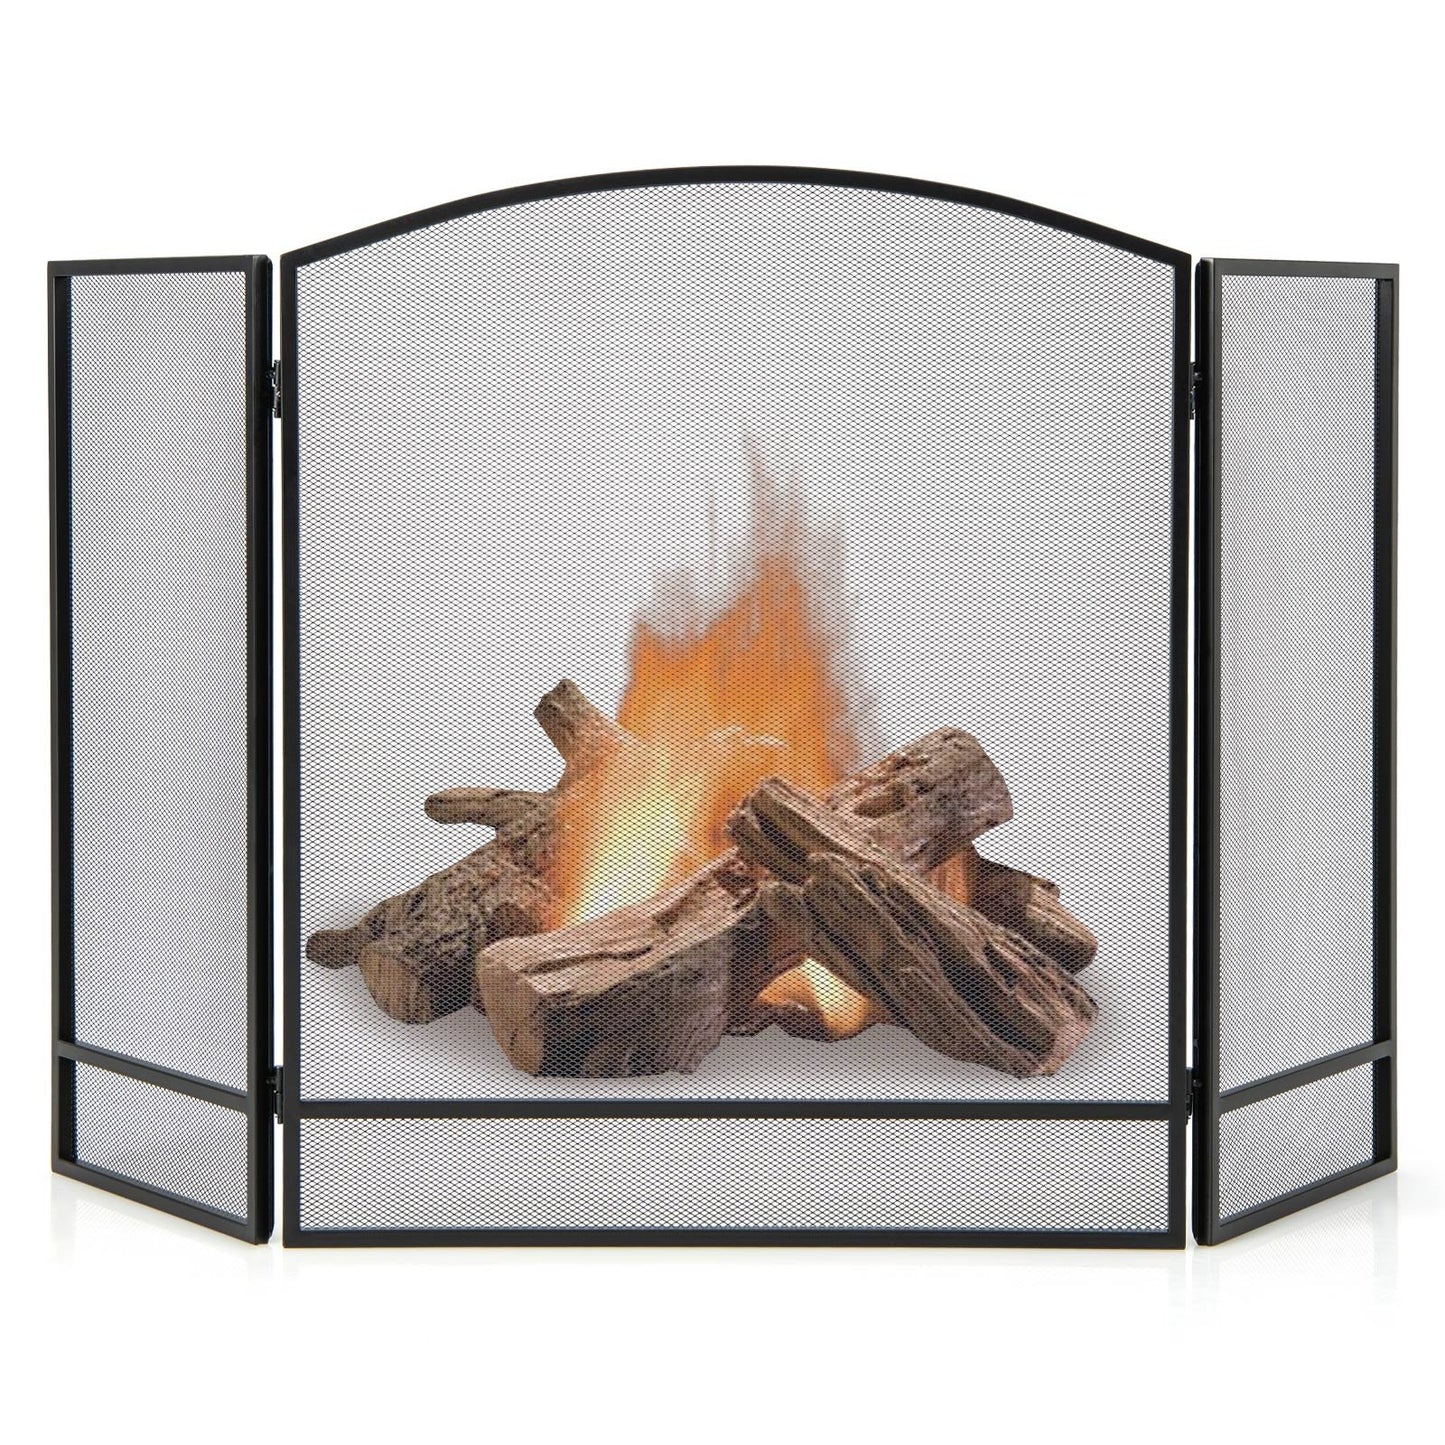 3-Panel Foldable Fireplace Screen with Wrought Metal Mesh, Black